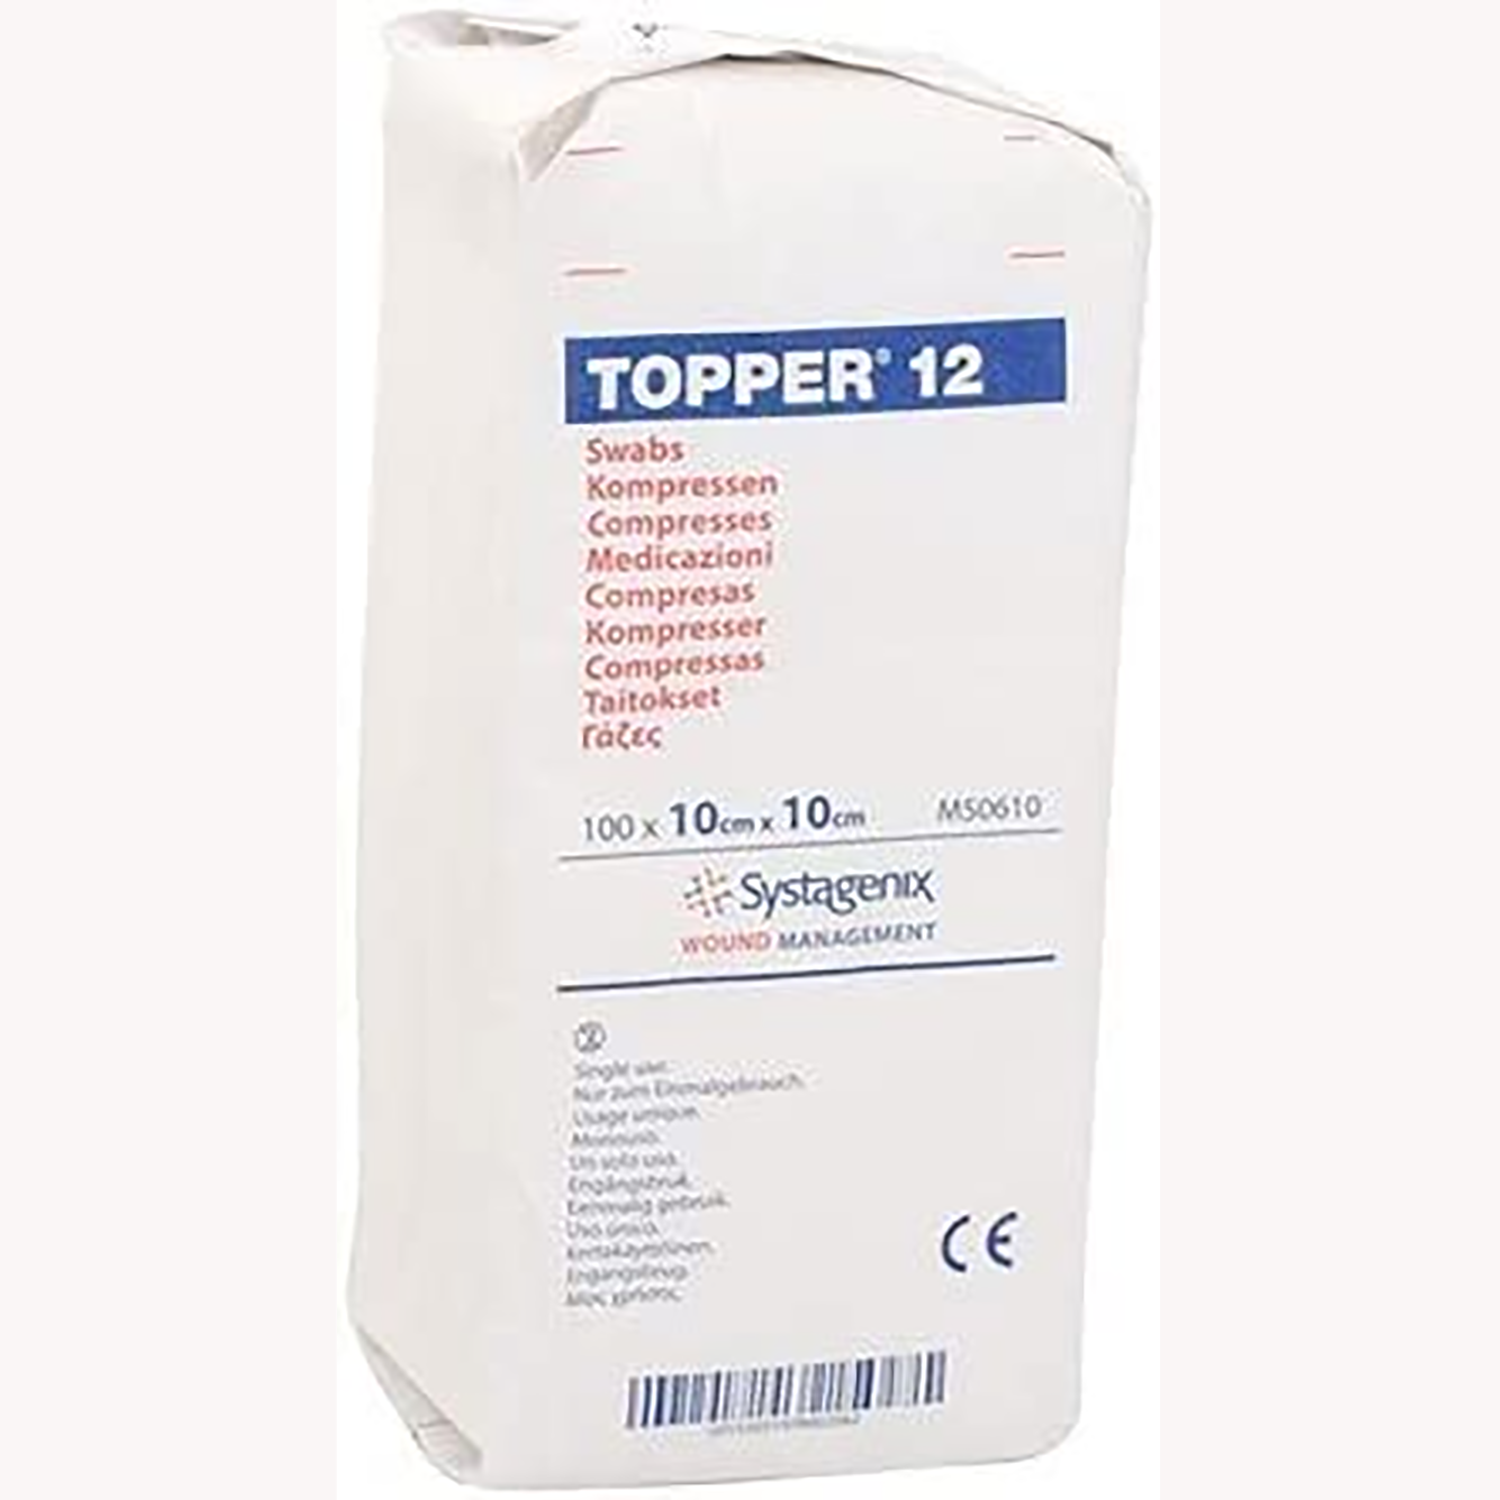 Topper 12 Swabs | Non Woven | 10 x 10cm (5's) | Sterile | Pack of 30